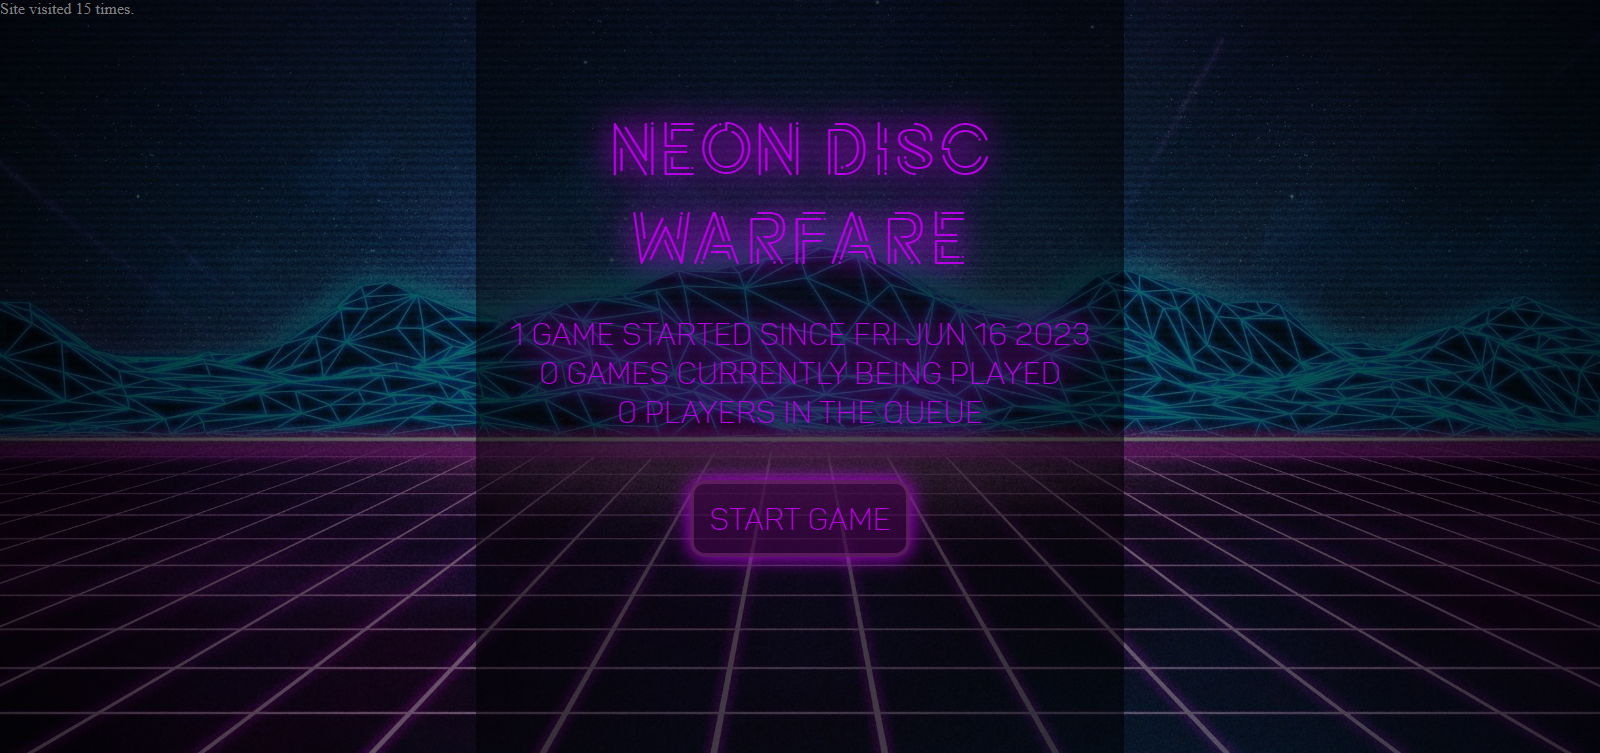 Splashscreen of the Neon Disc Warfare game, showing the title of the game, some game metrics, and a "start game" button